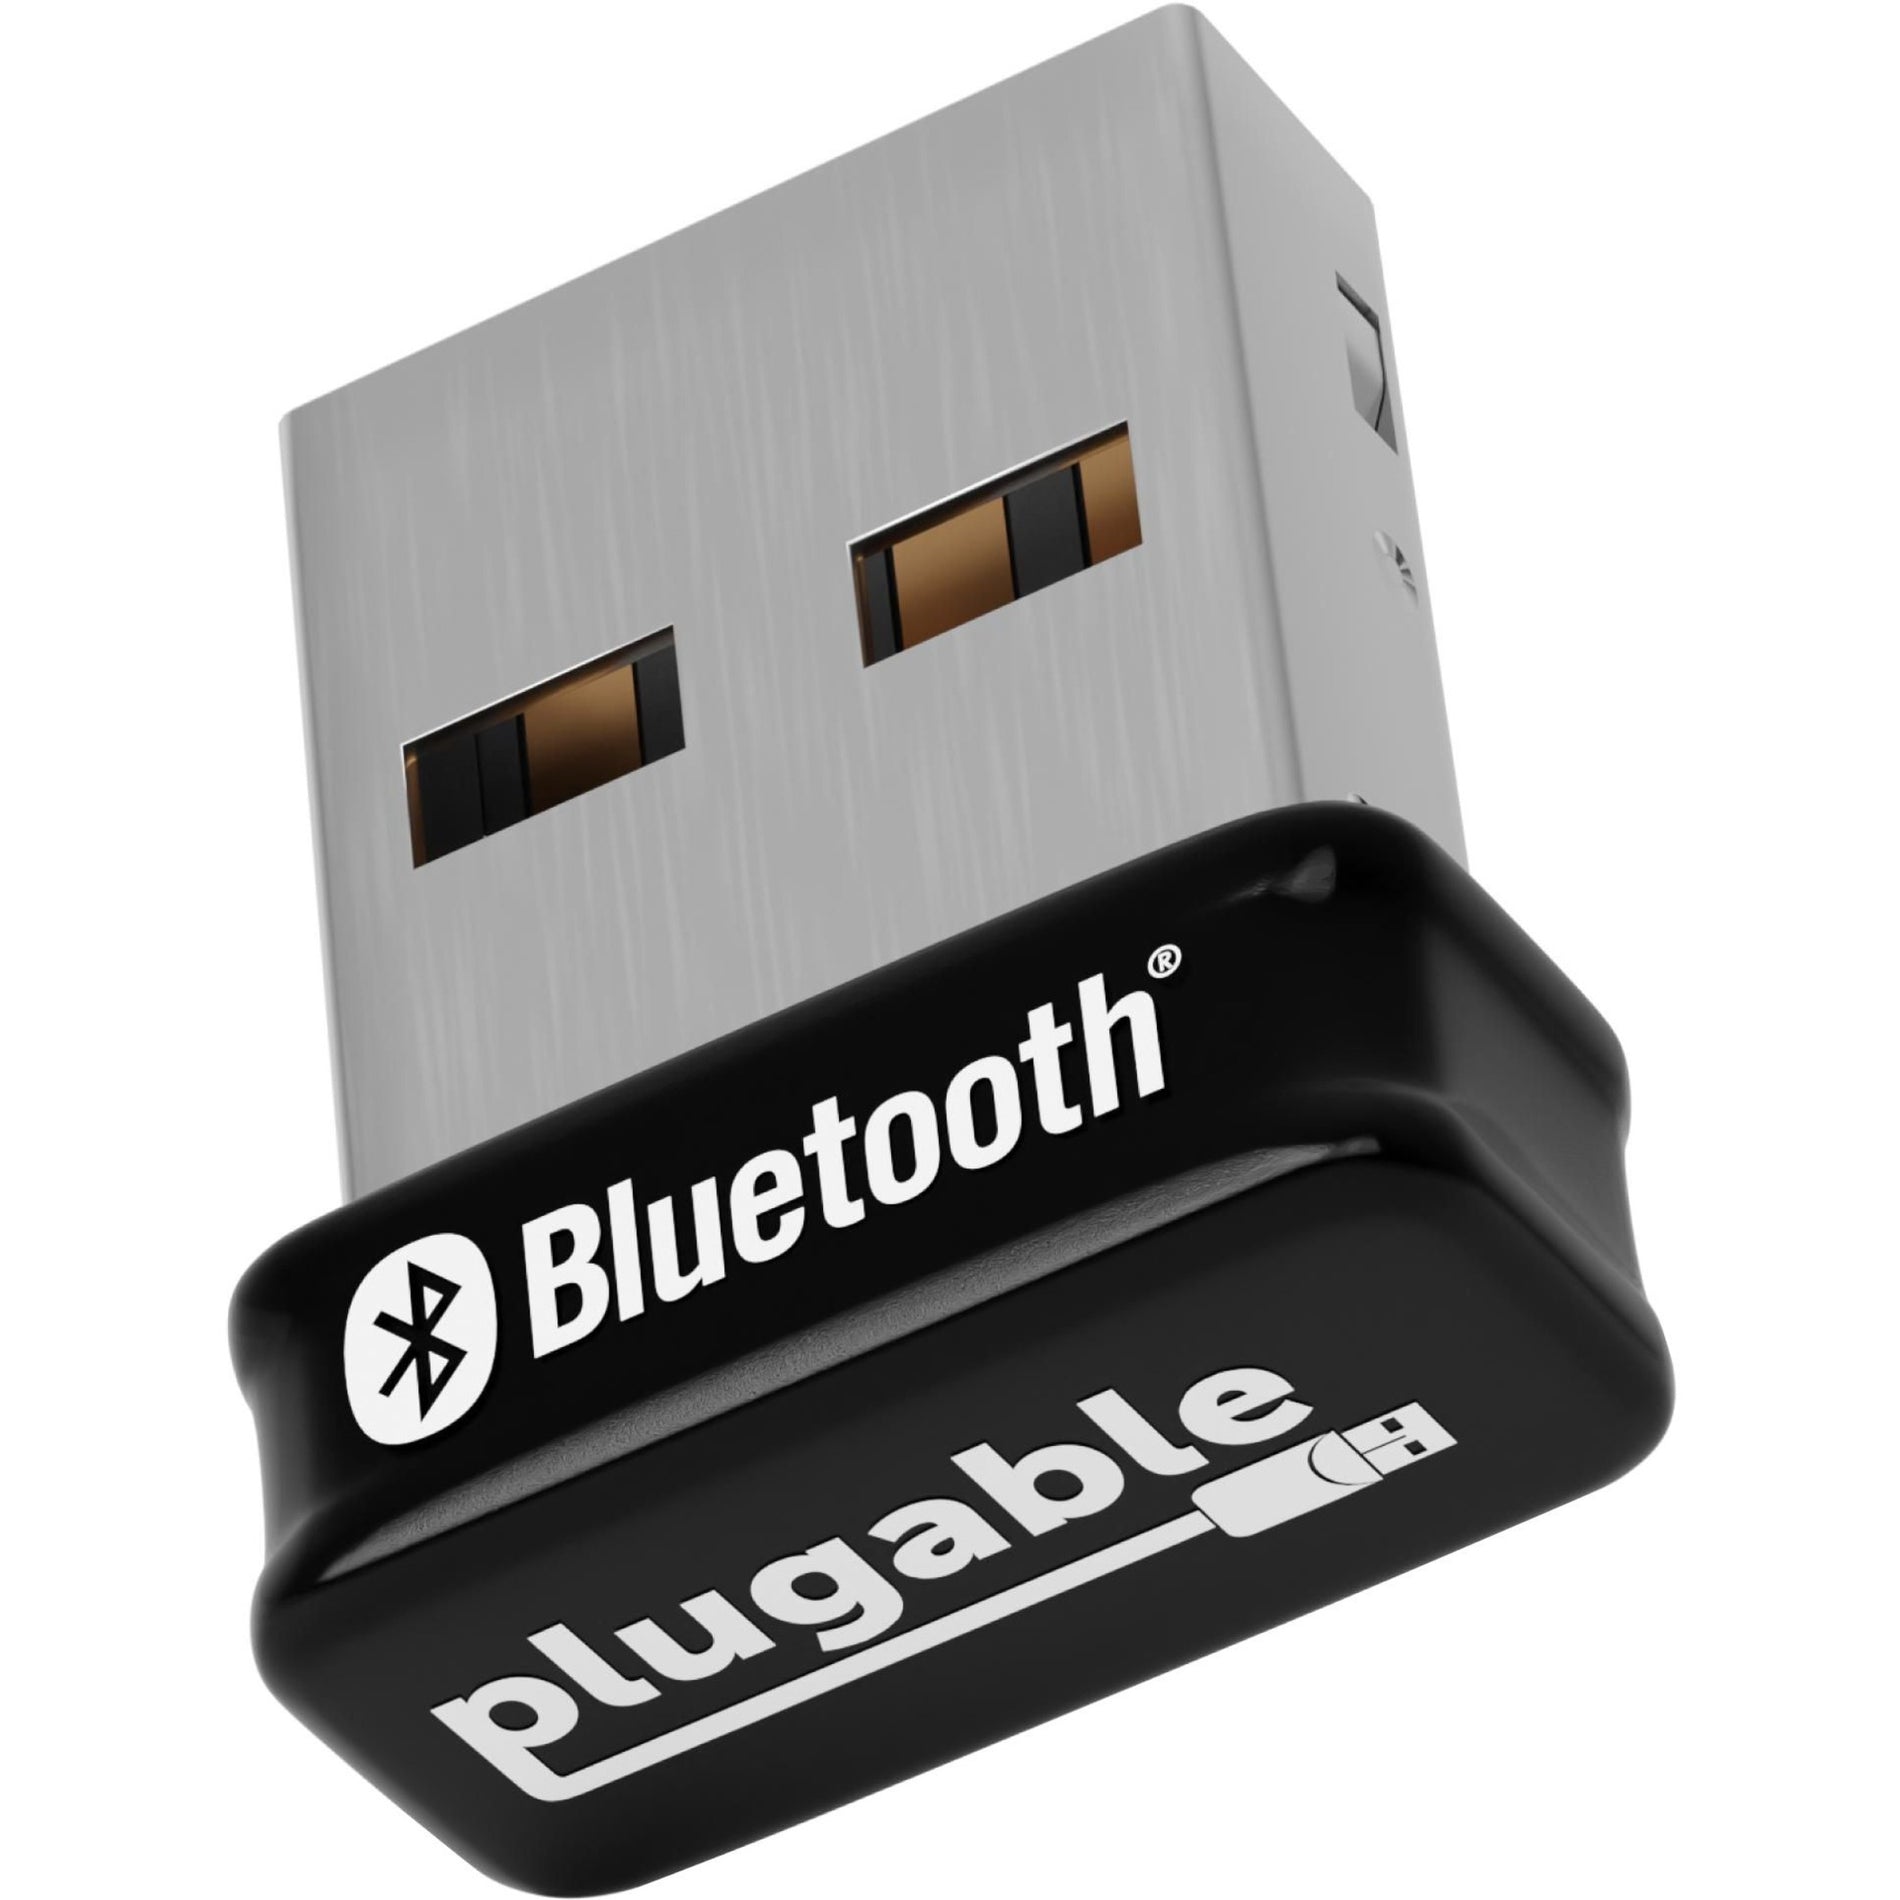 Plugable USB-BT5 Bluetooth Adapter for PC, Bluetooth 5.0 Dongle, Compatible with Windows